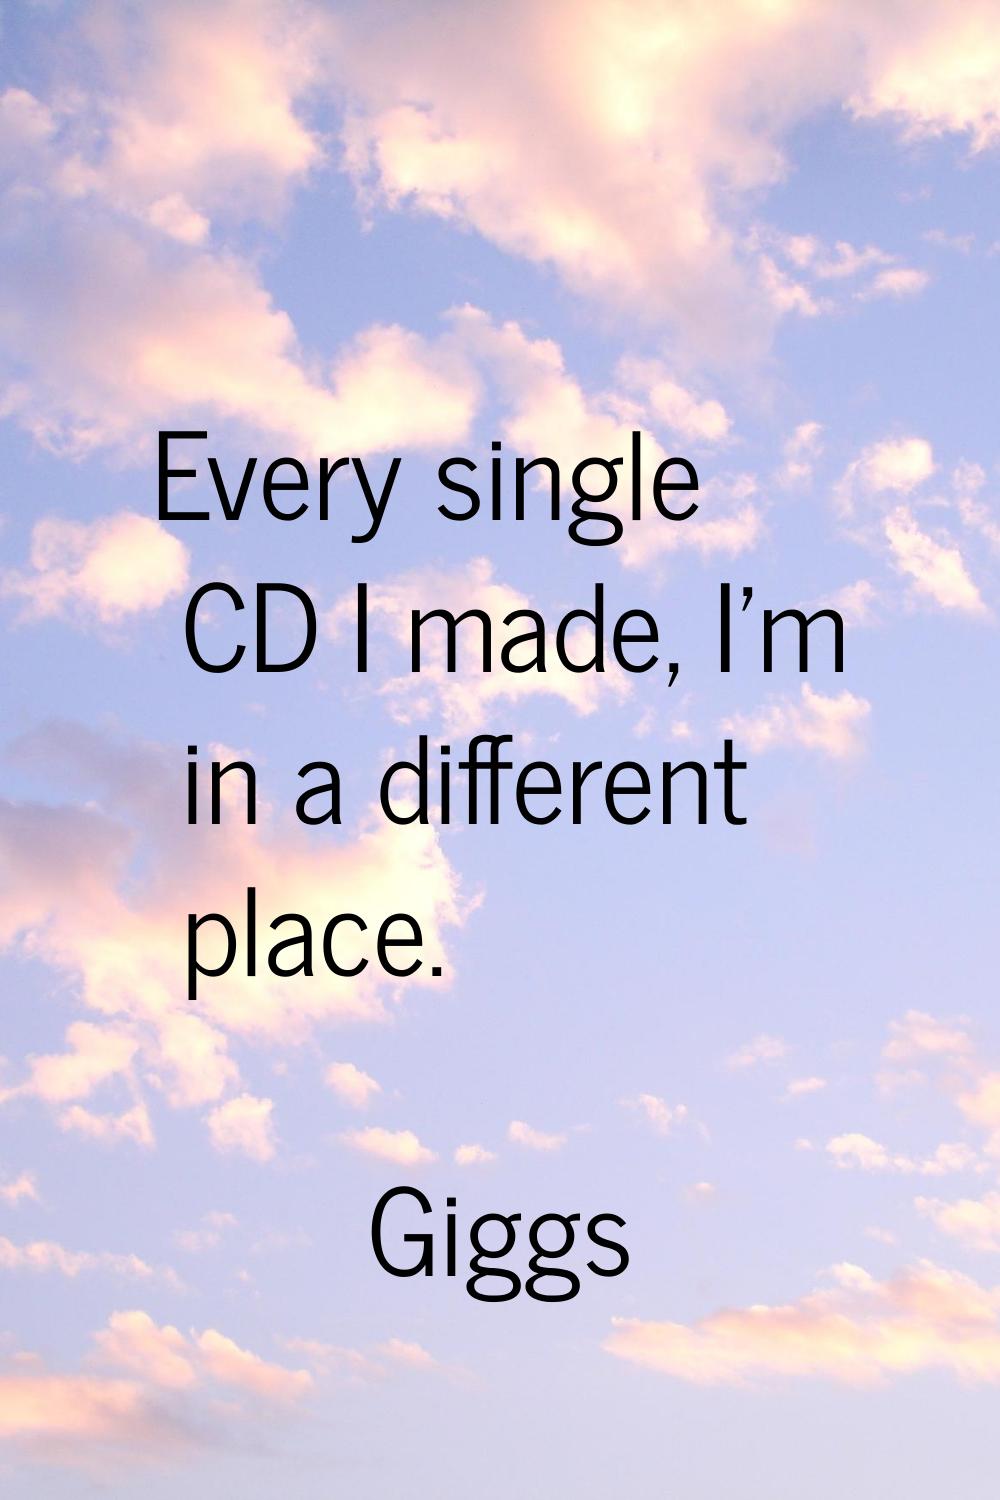 Every single CD I made, I'm in a different place.